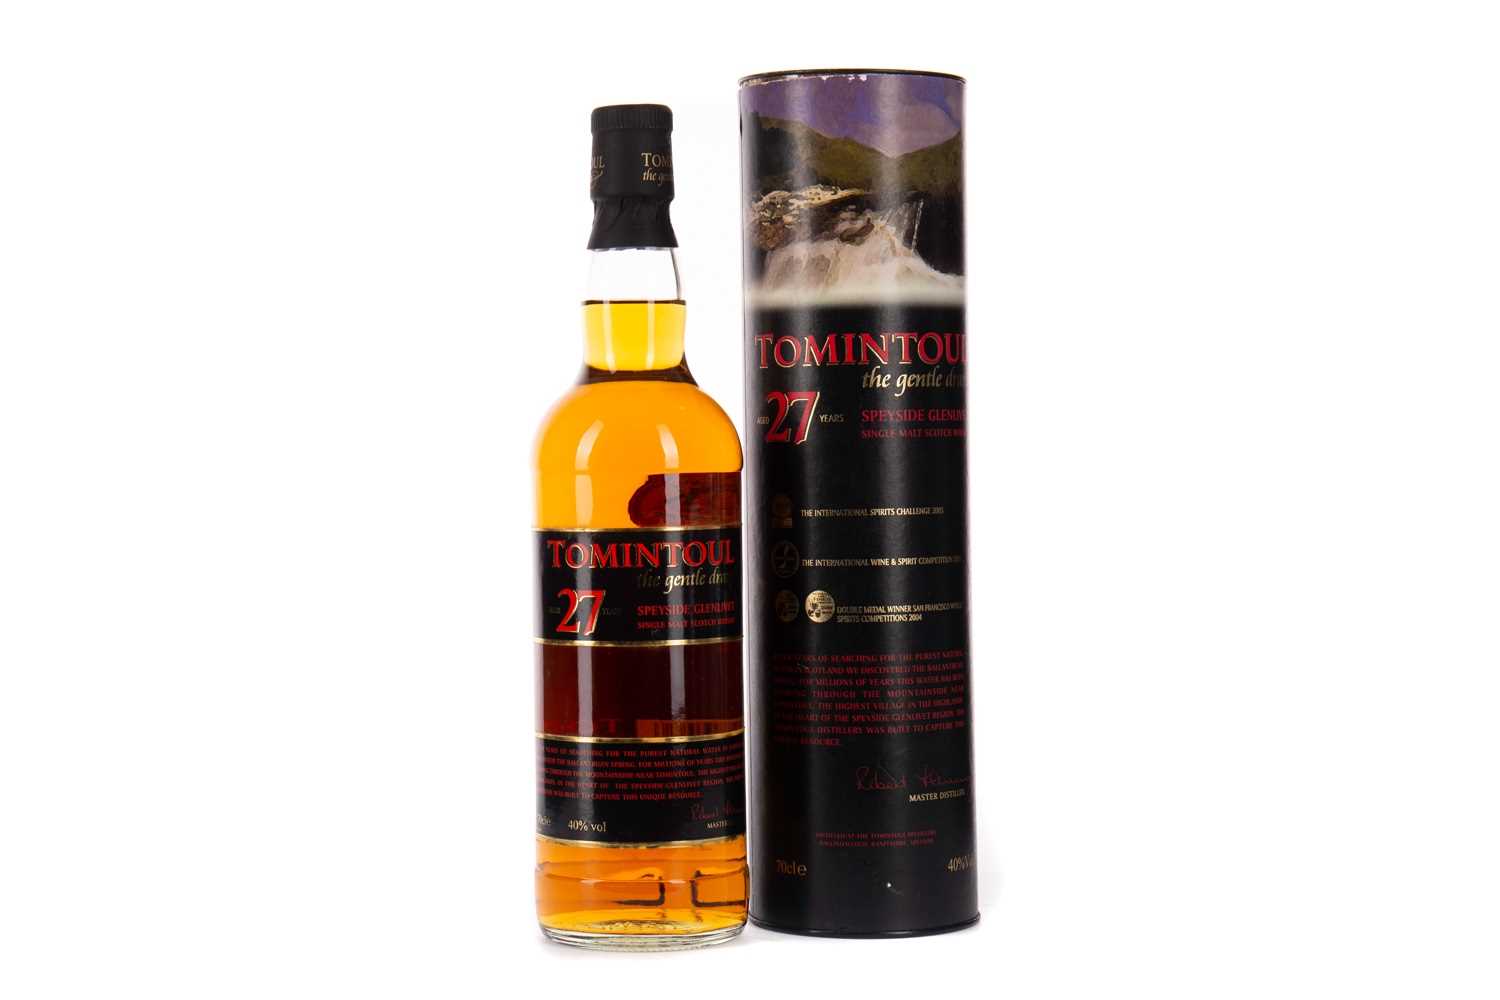 Lot 72 - TOMINTOUL AGED 27 YEARS